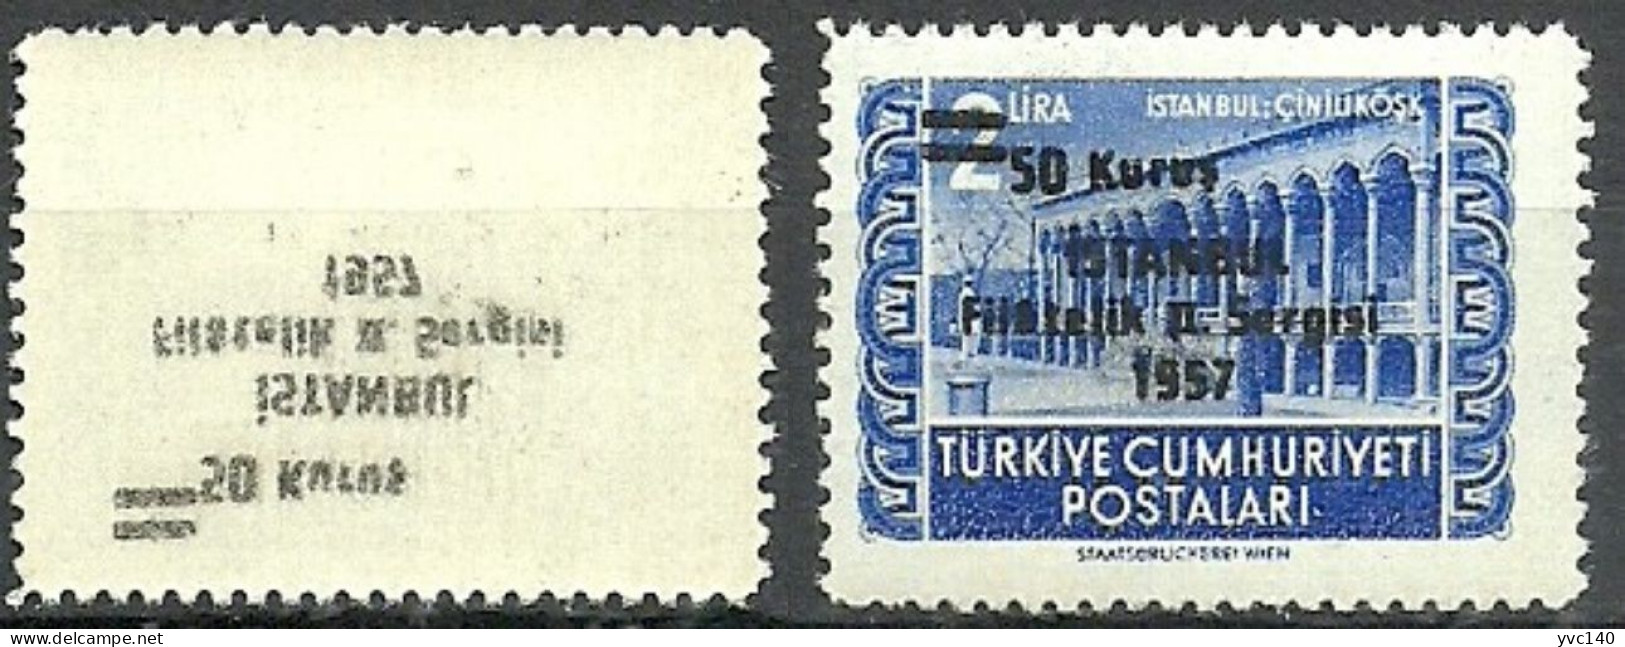 Turkey; 1957 Surcharged Commemorative Stamp For Istanbul Philately Exhibition ERROR "Abklatsch Surcharge" - Nuevos